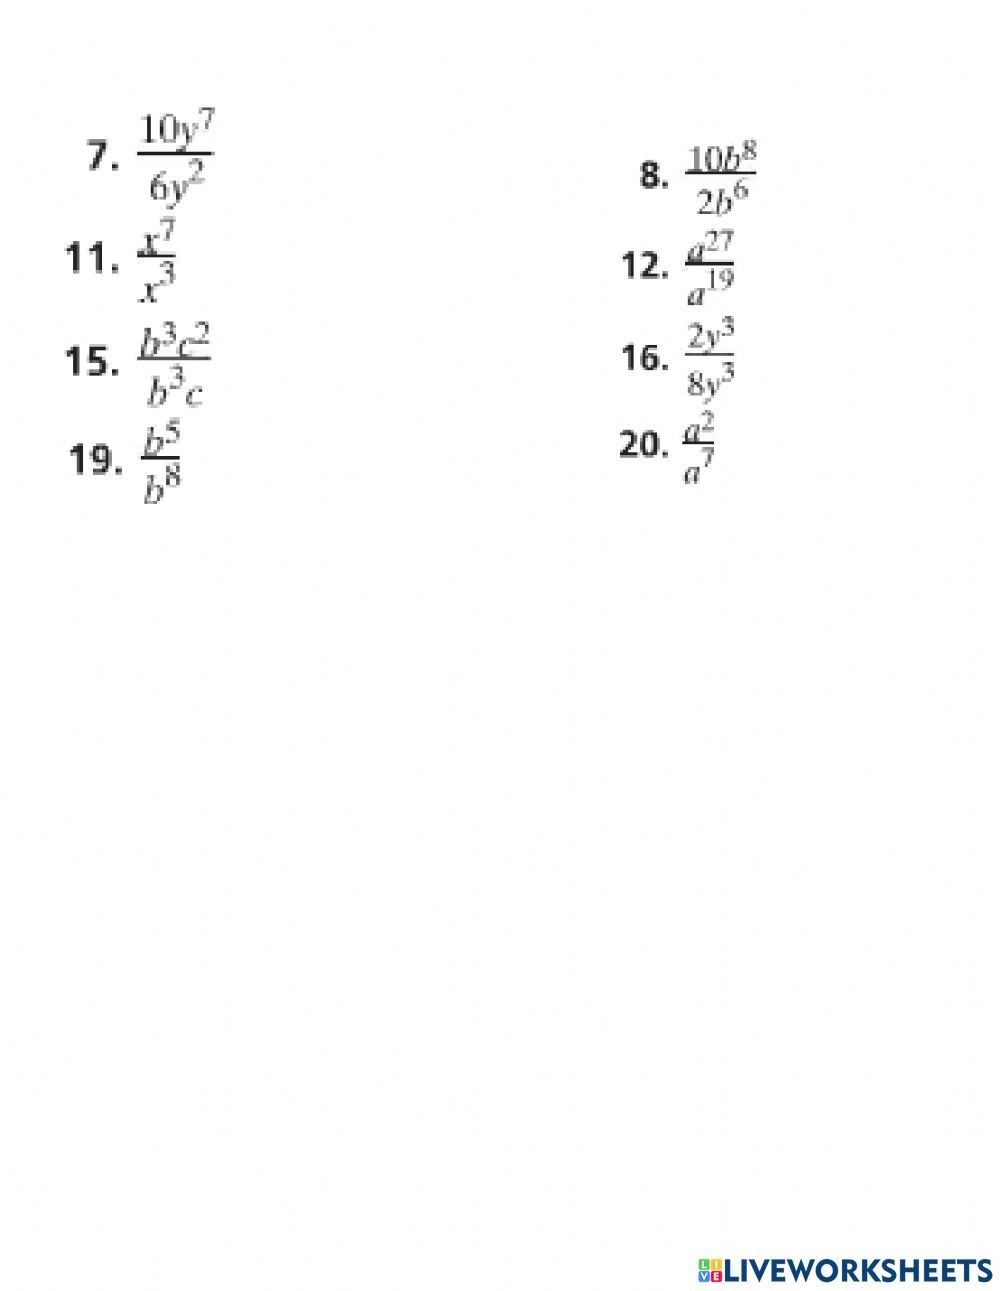 exponents-and-division-interactive-worksheet-math-worksheet-answers